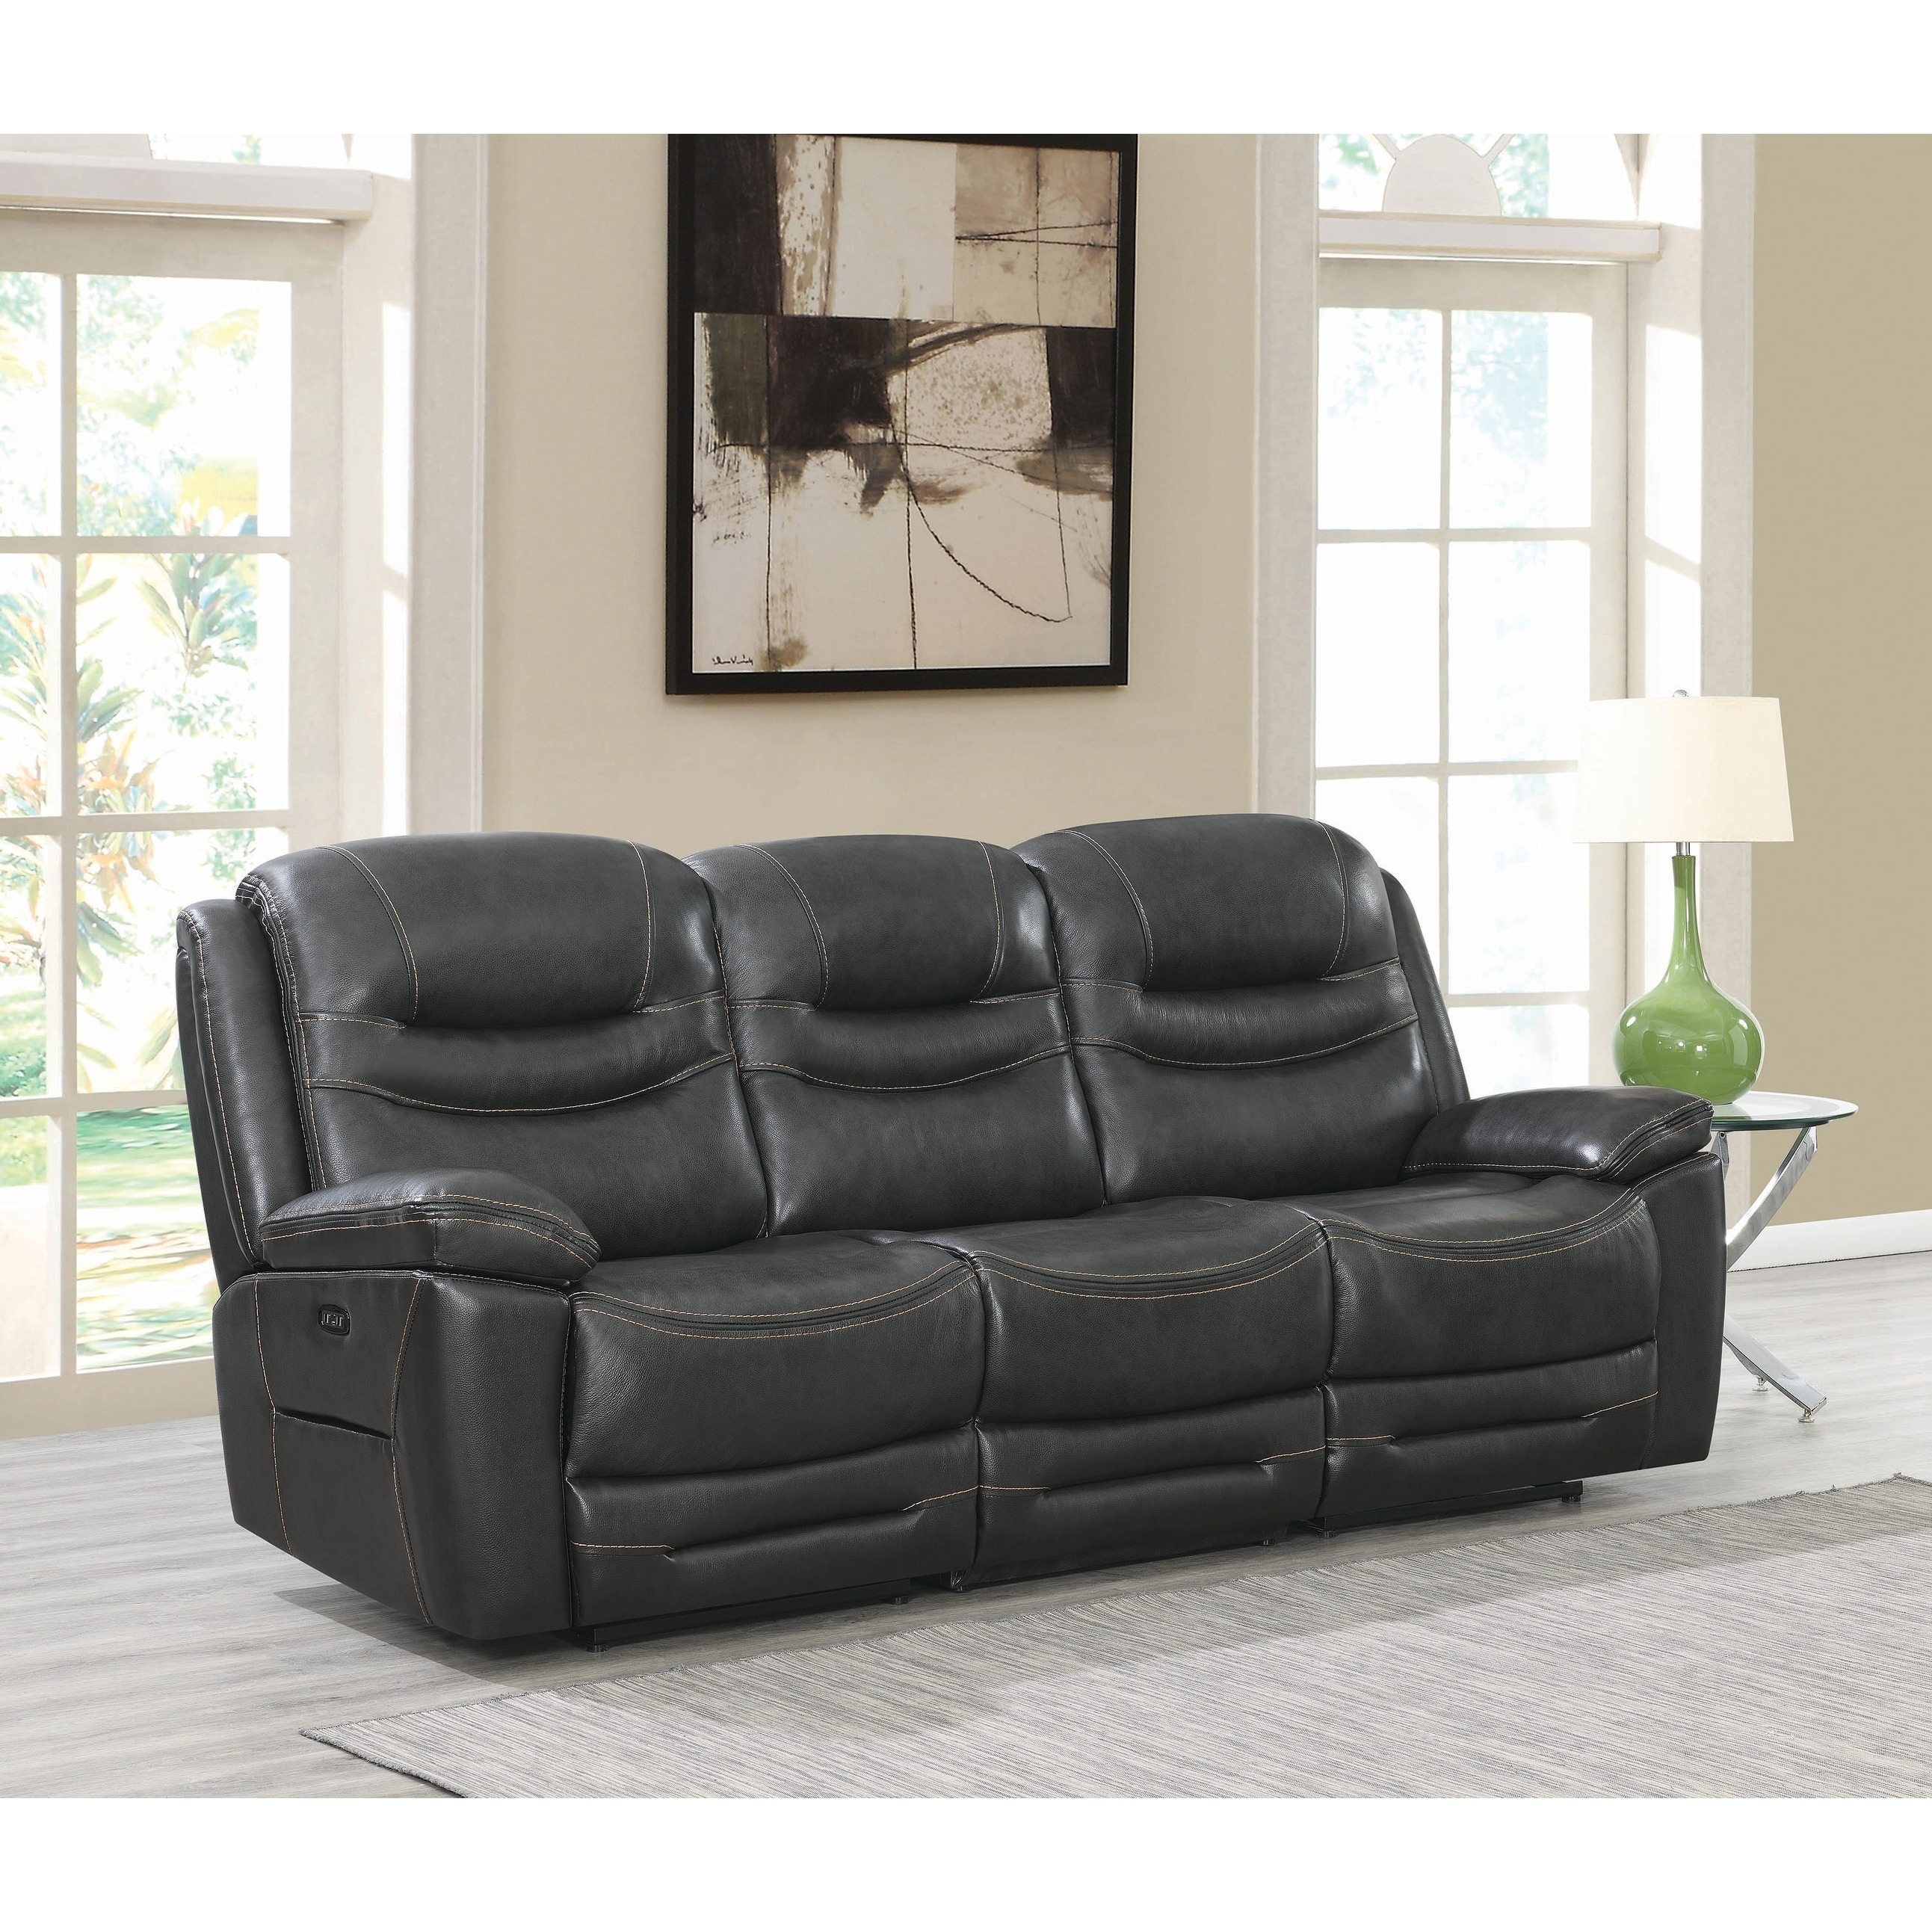 Shop Destin Upholstered Power 2 Sofa Free Shipping Today